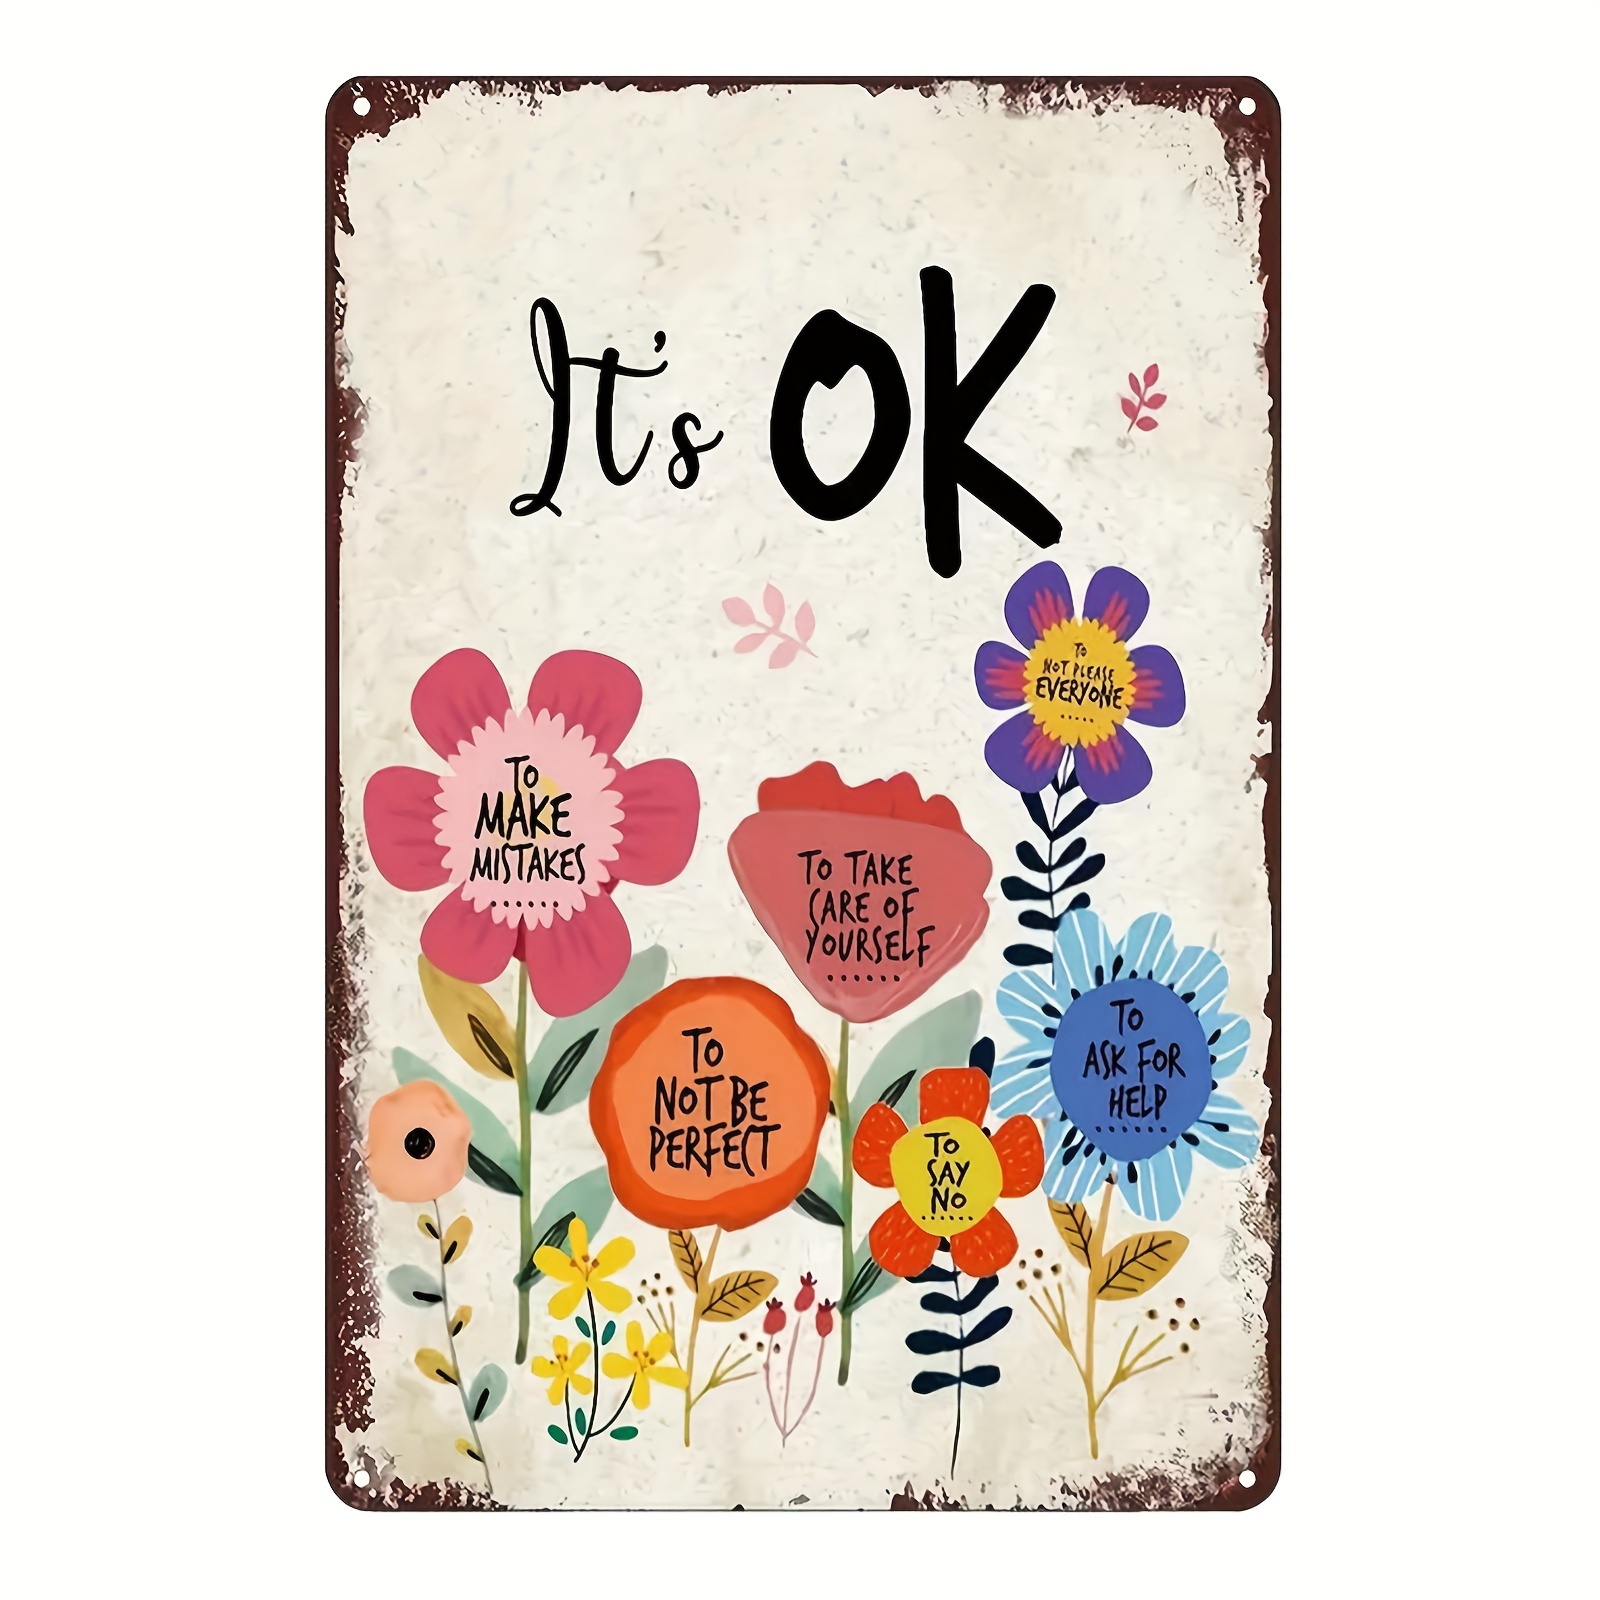 

Inspirational 'it's Ok' Metal Wall Art - 8x12" Iron Sign With Encouraging Quotes For Girls Room Decor, Perfect Gift For Daughters